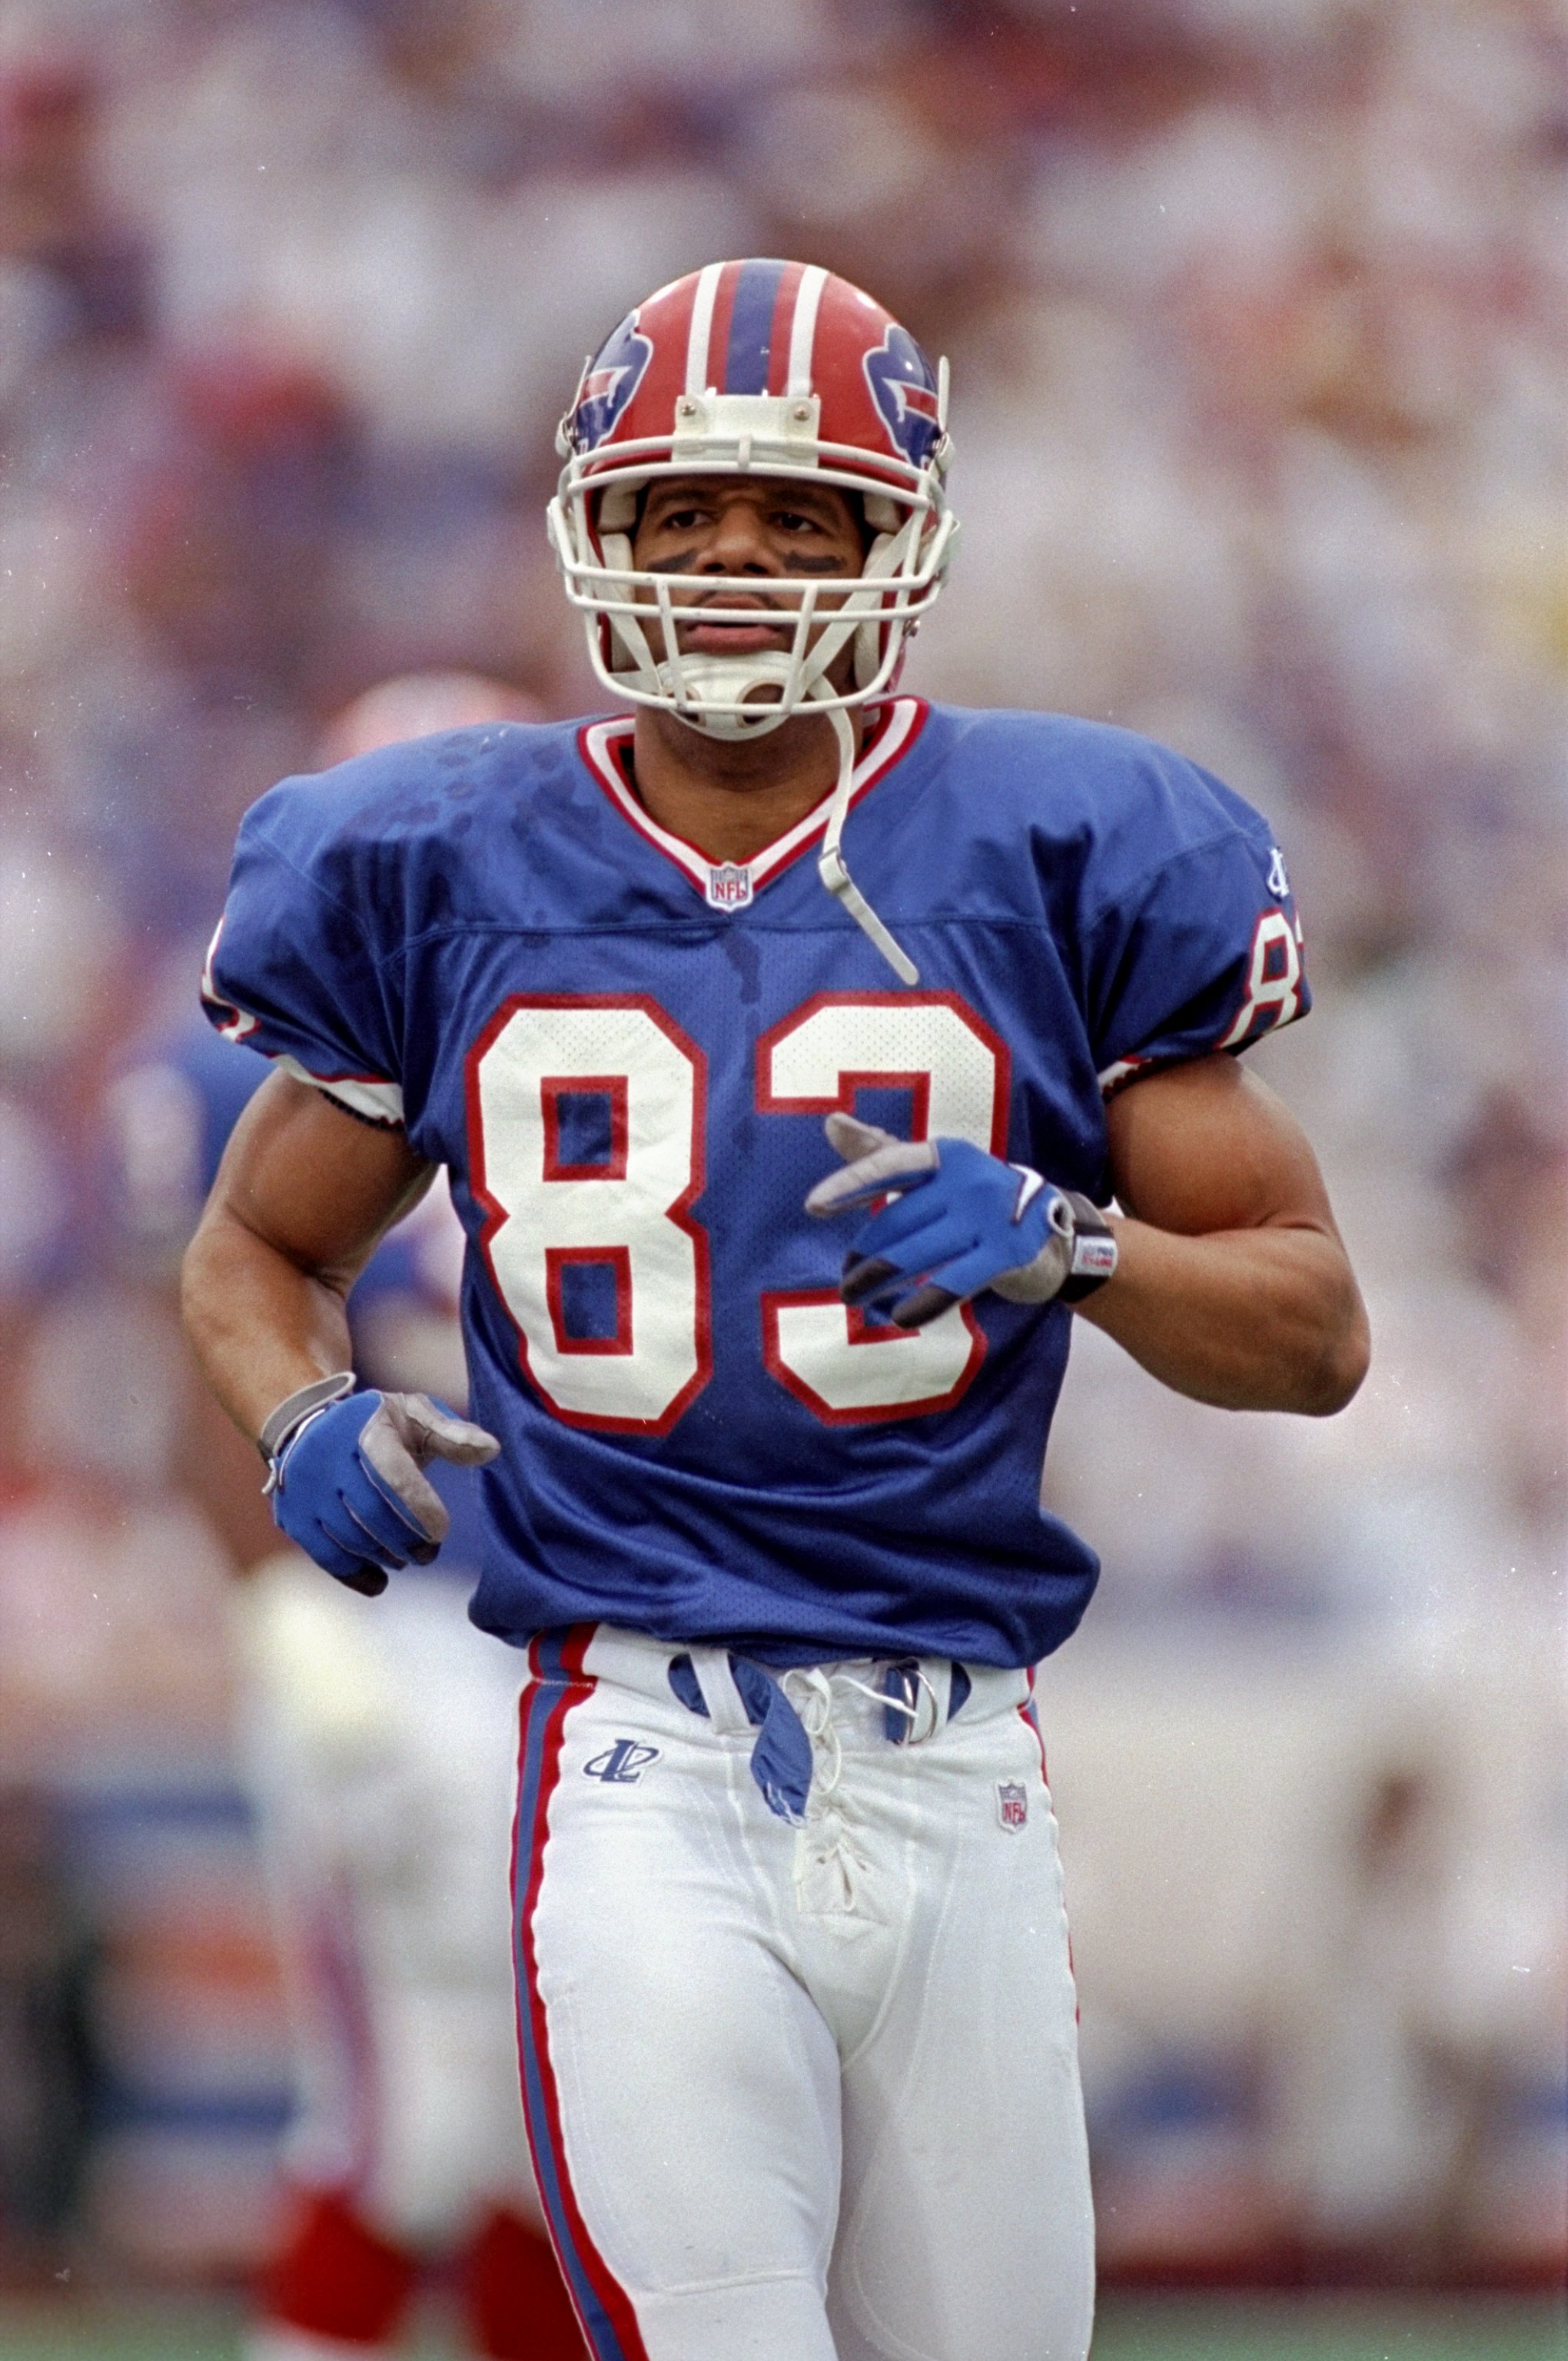 18 Oct 1998: Wide receiver Andre Reed #83 of the Buffalo Bills in action during the game against the Jacksonville Jaguars at the Rich Stadium in Orchard Park, New York. The Bills defeated the Jaguars 17-16.